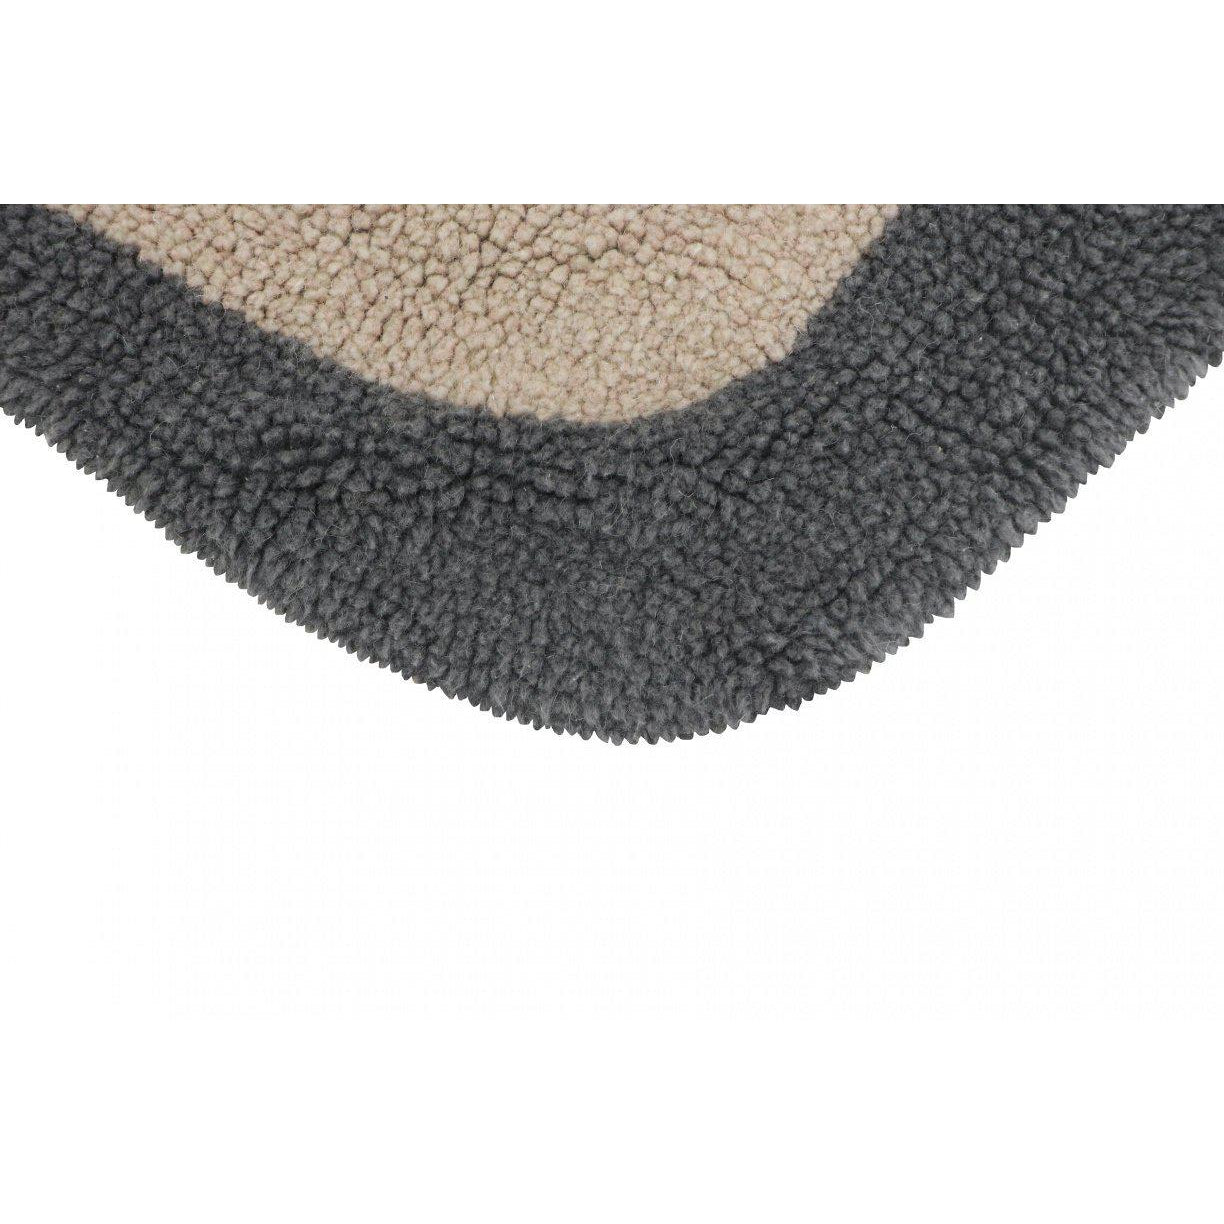 Rugs by Roo | Lorena Canals Batboy Wool Washable Area Rug-WO-E-BATBOY